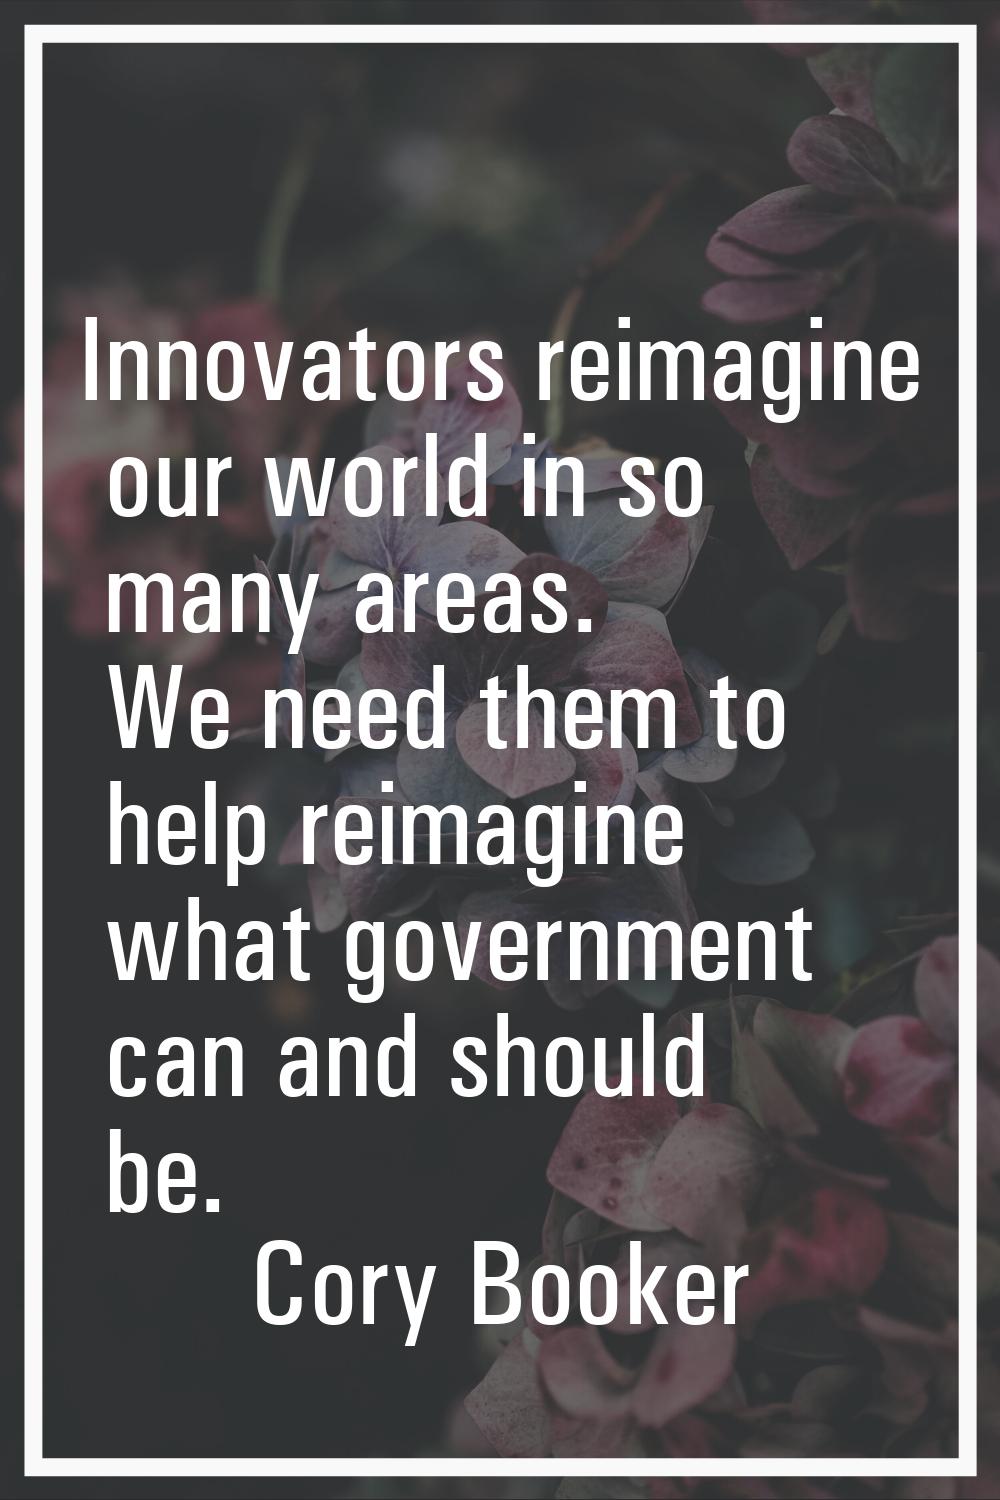 Innovators reimagine our world in so many areas. We need them to help reimagine what government can